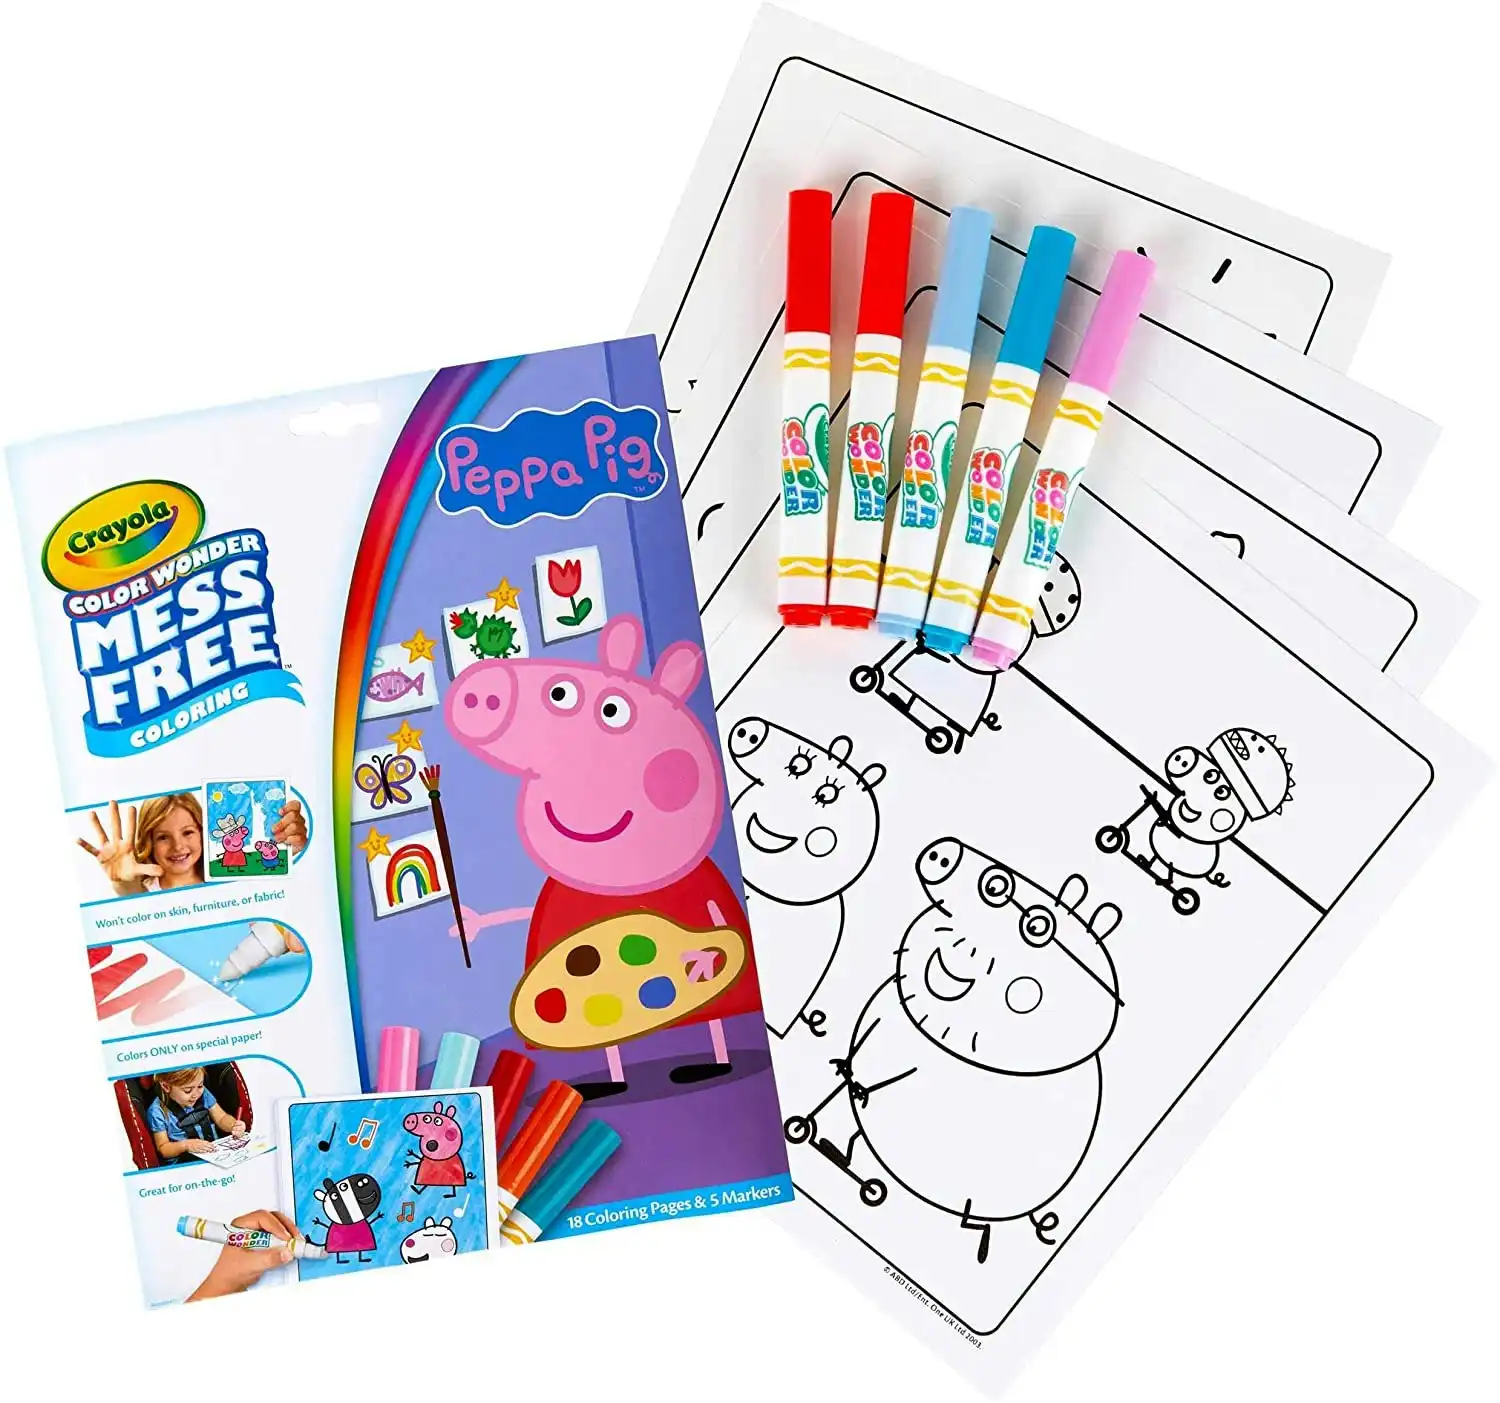 Crayola Peppa Pig Colour Wonder Set - Colouring Pages & Markers